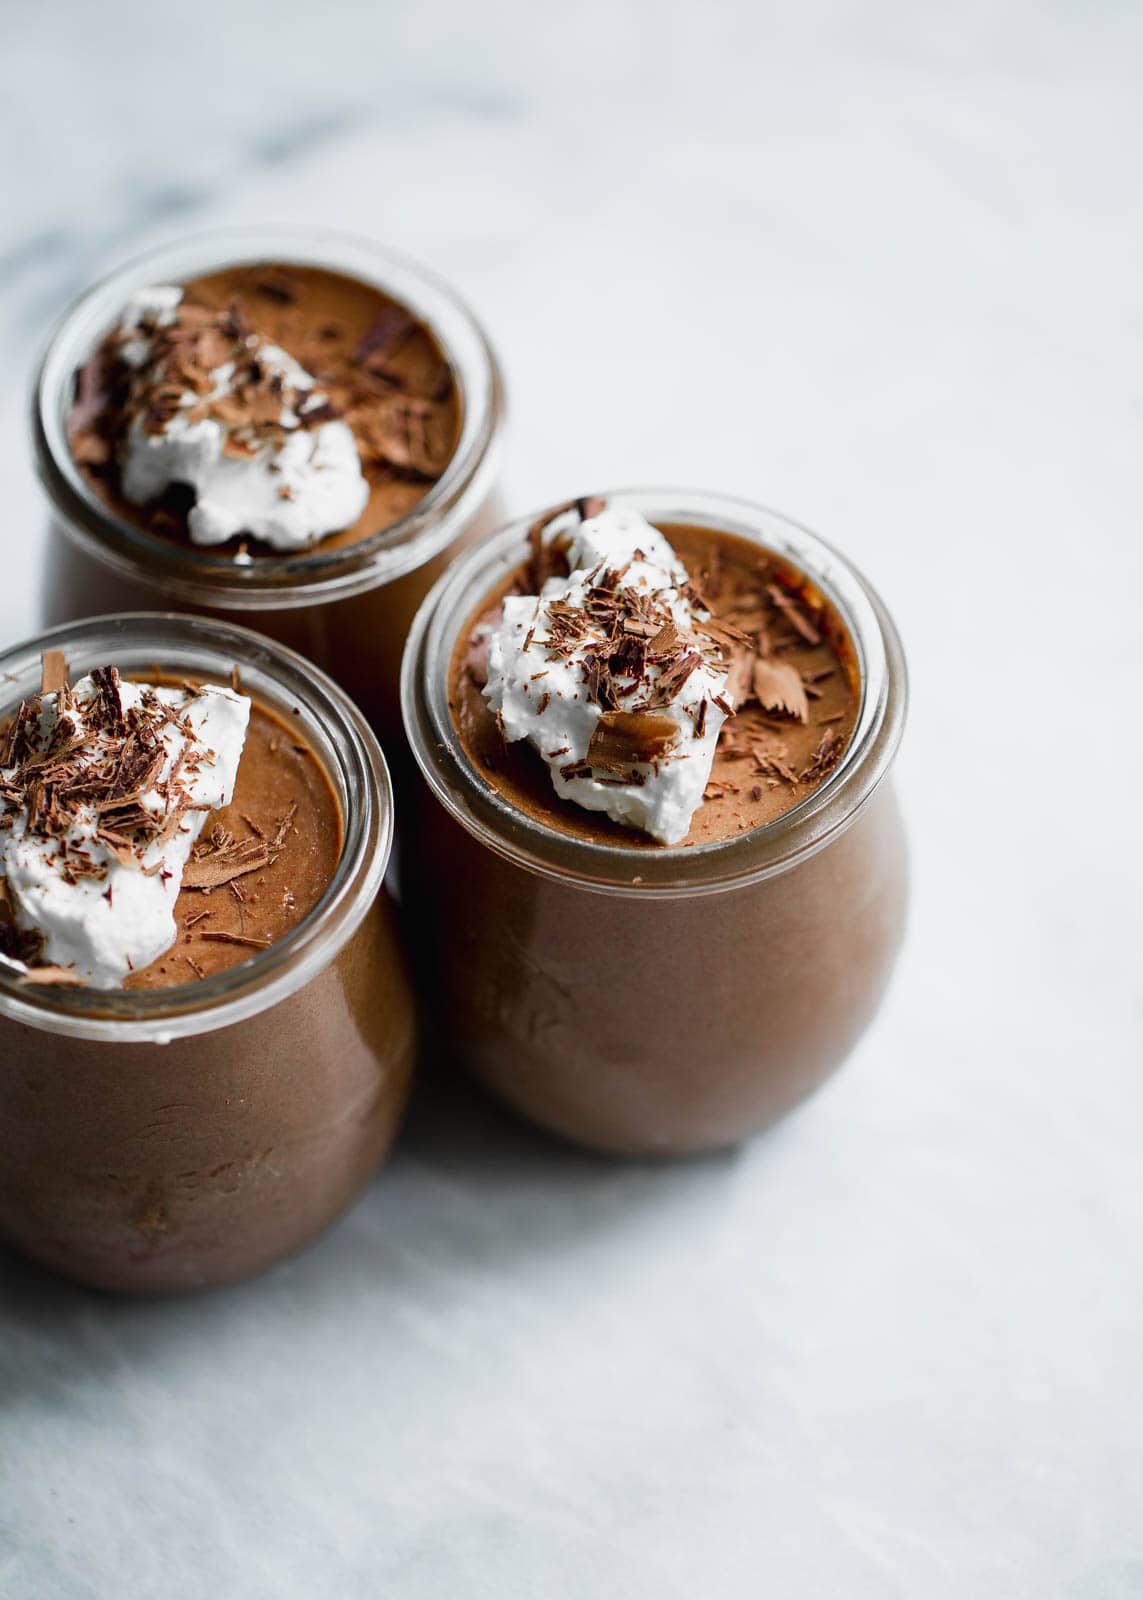 A rich chocolate mousse made healthier with a secret ingredient! Best part? You can't taste a difference at all!